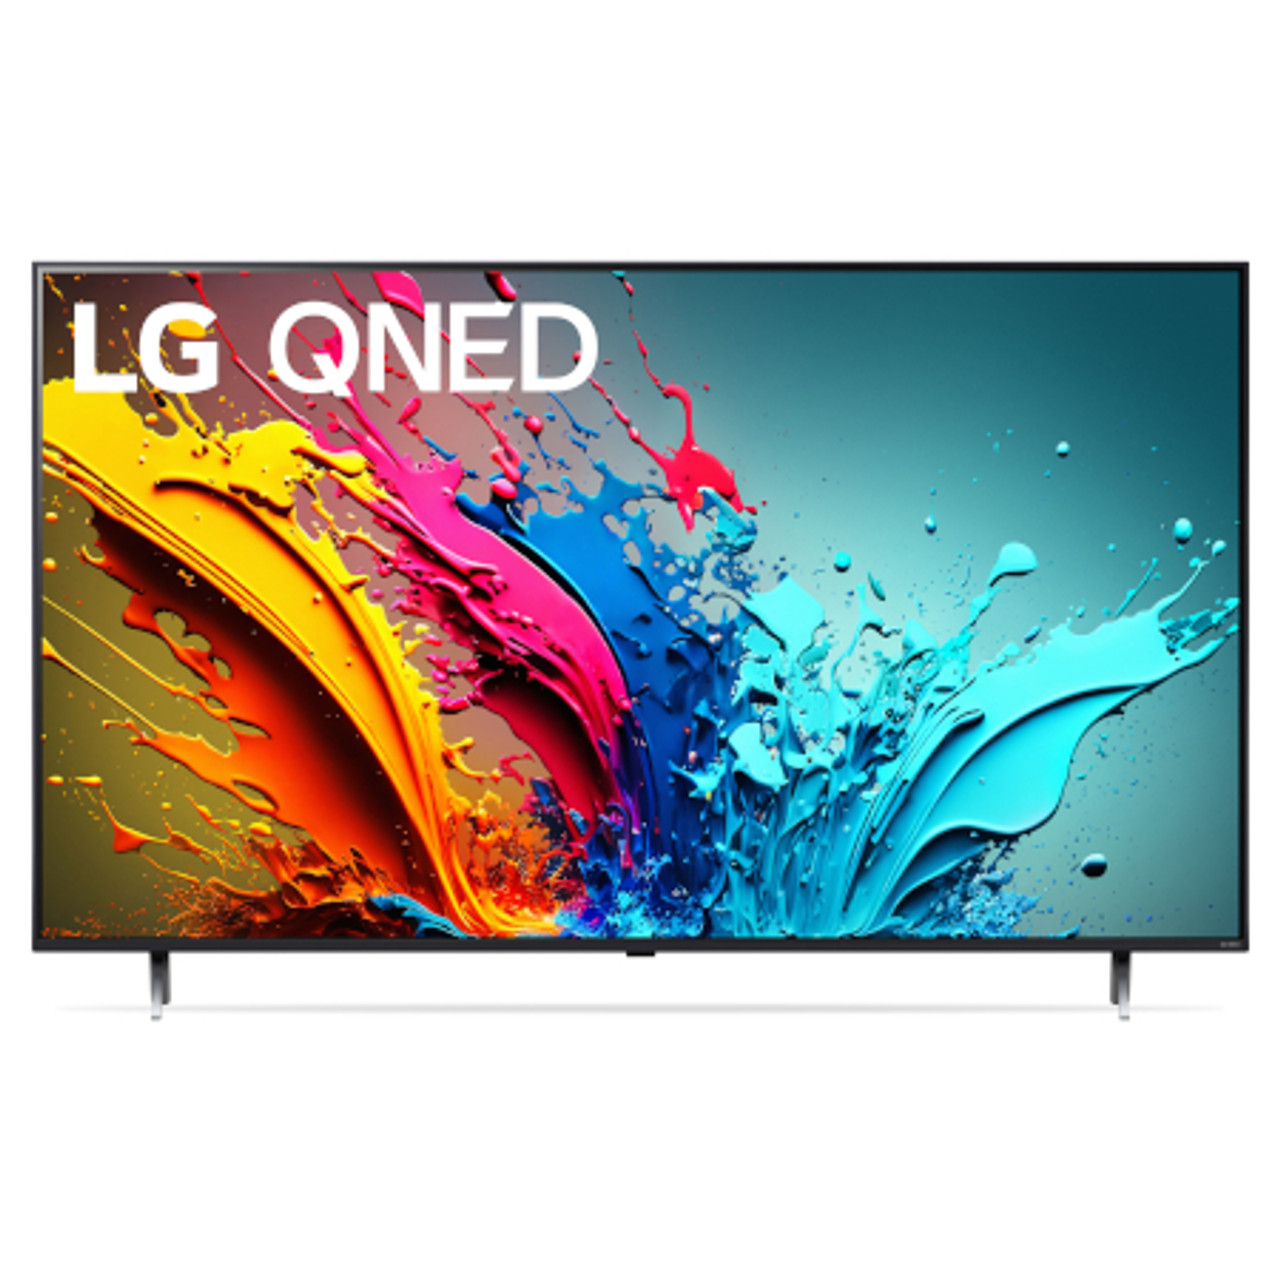 LG 86QNED85TUA 86 Inch 4K UHD QNED LED TV with webOS 24 - 86.4 Inch Diagonal